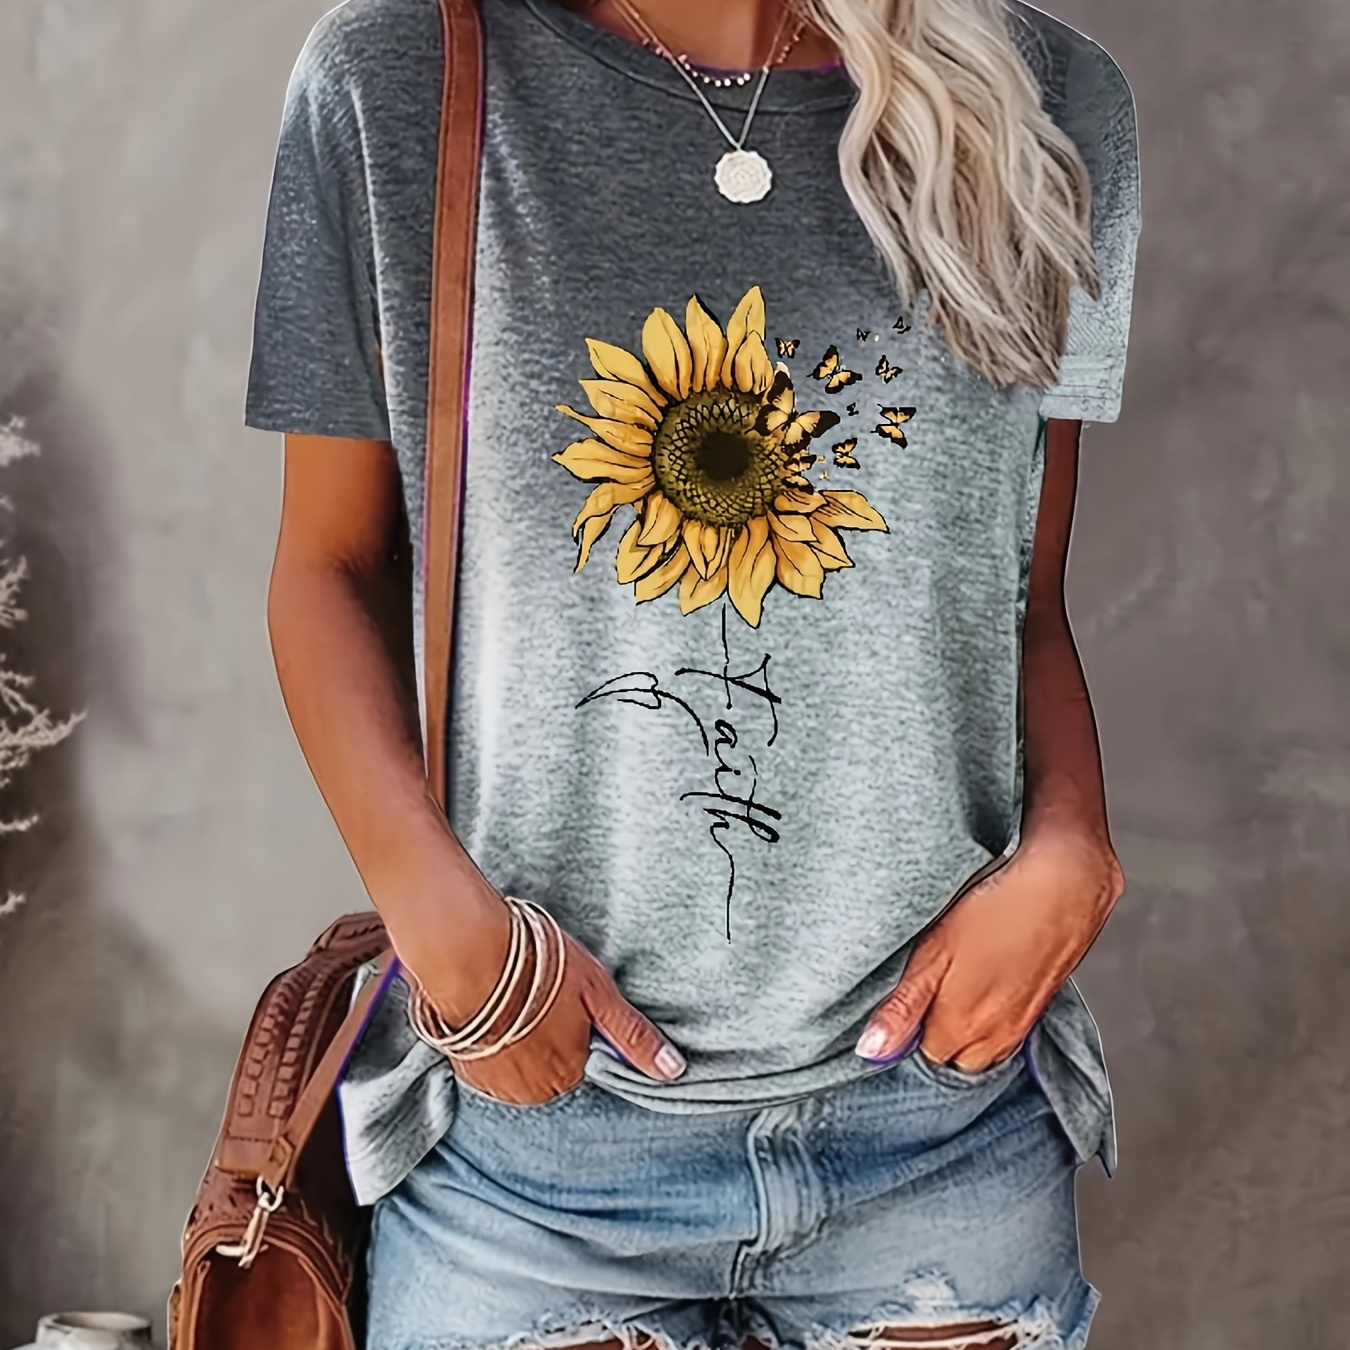 

Sunflower & Butterfly Print T-shirt, Short Sleeve Crew Neck Casual Top For Summer & Spring, Women's Clothing